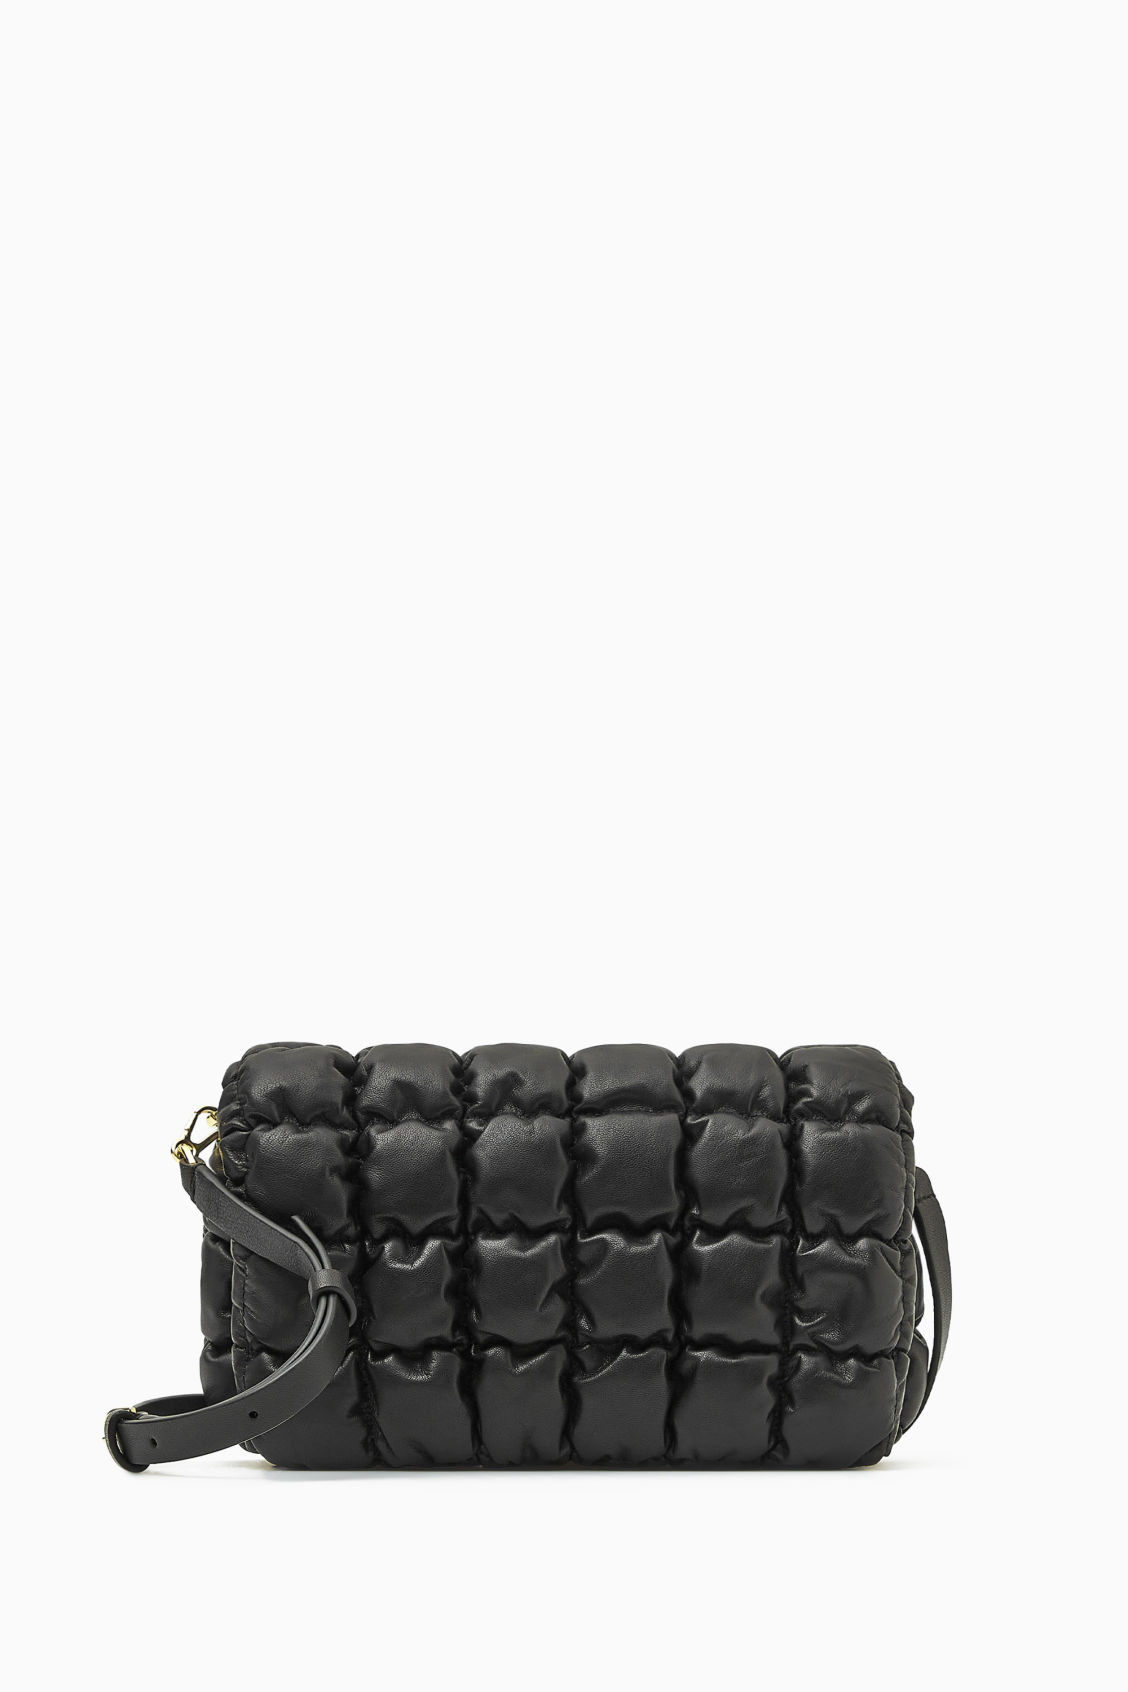 COS + Quilted Crossbody - Leather-based mostly